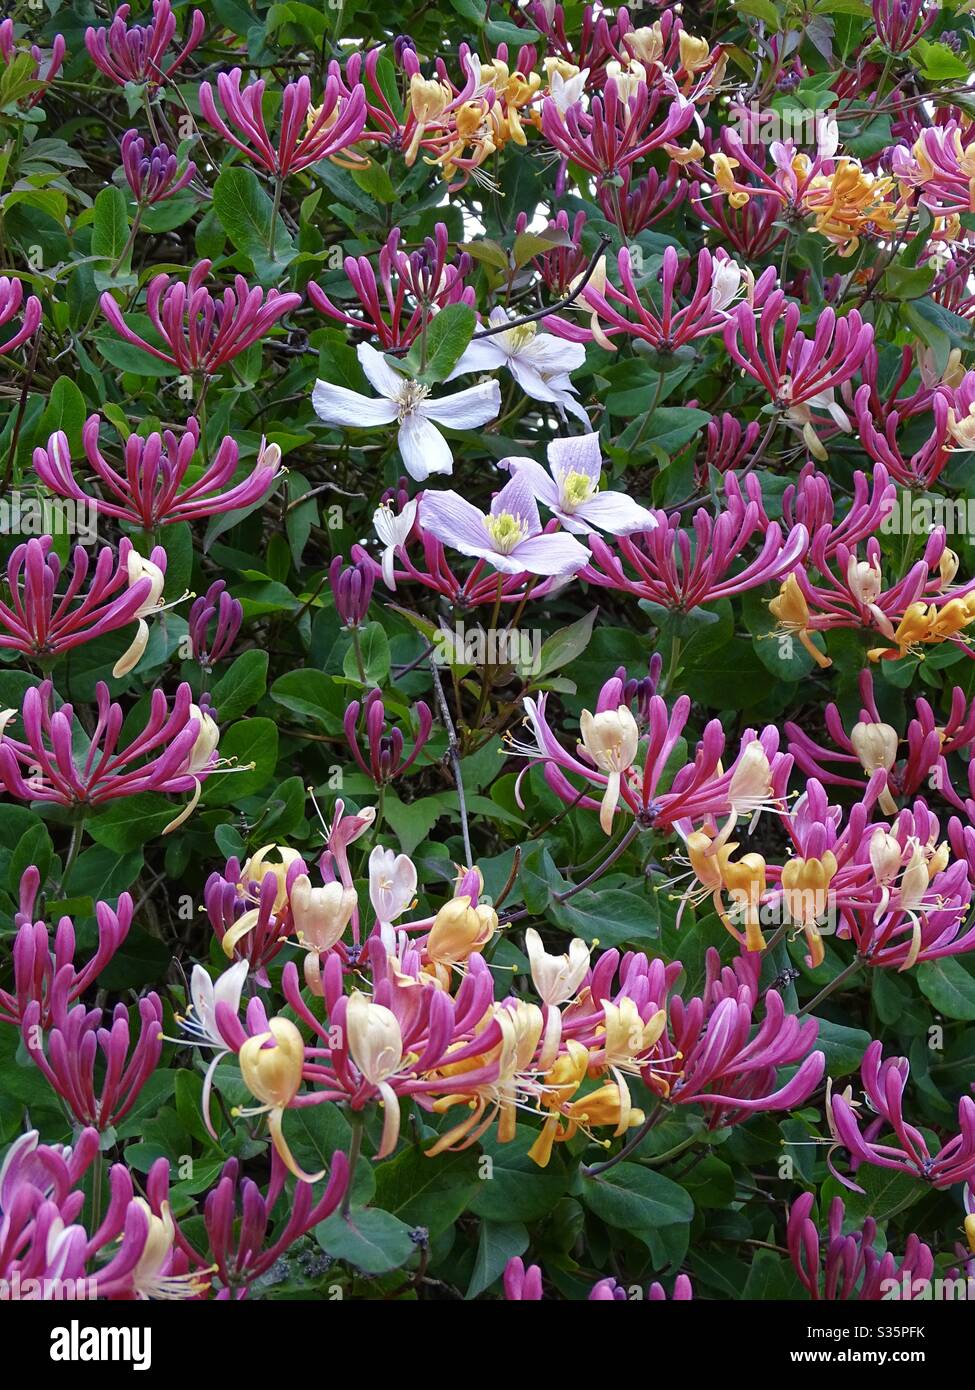 Stunning display of clematis and honeysuckle flowers in the spring sunshine Stock Photo